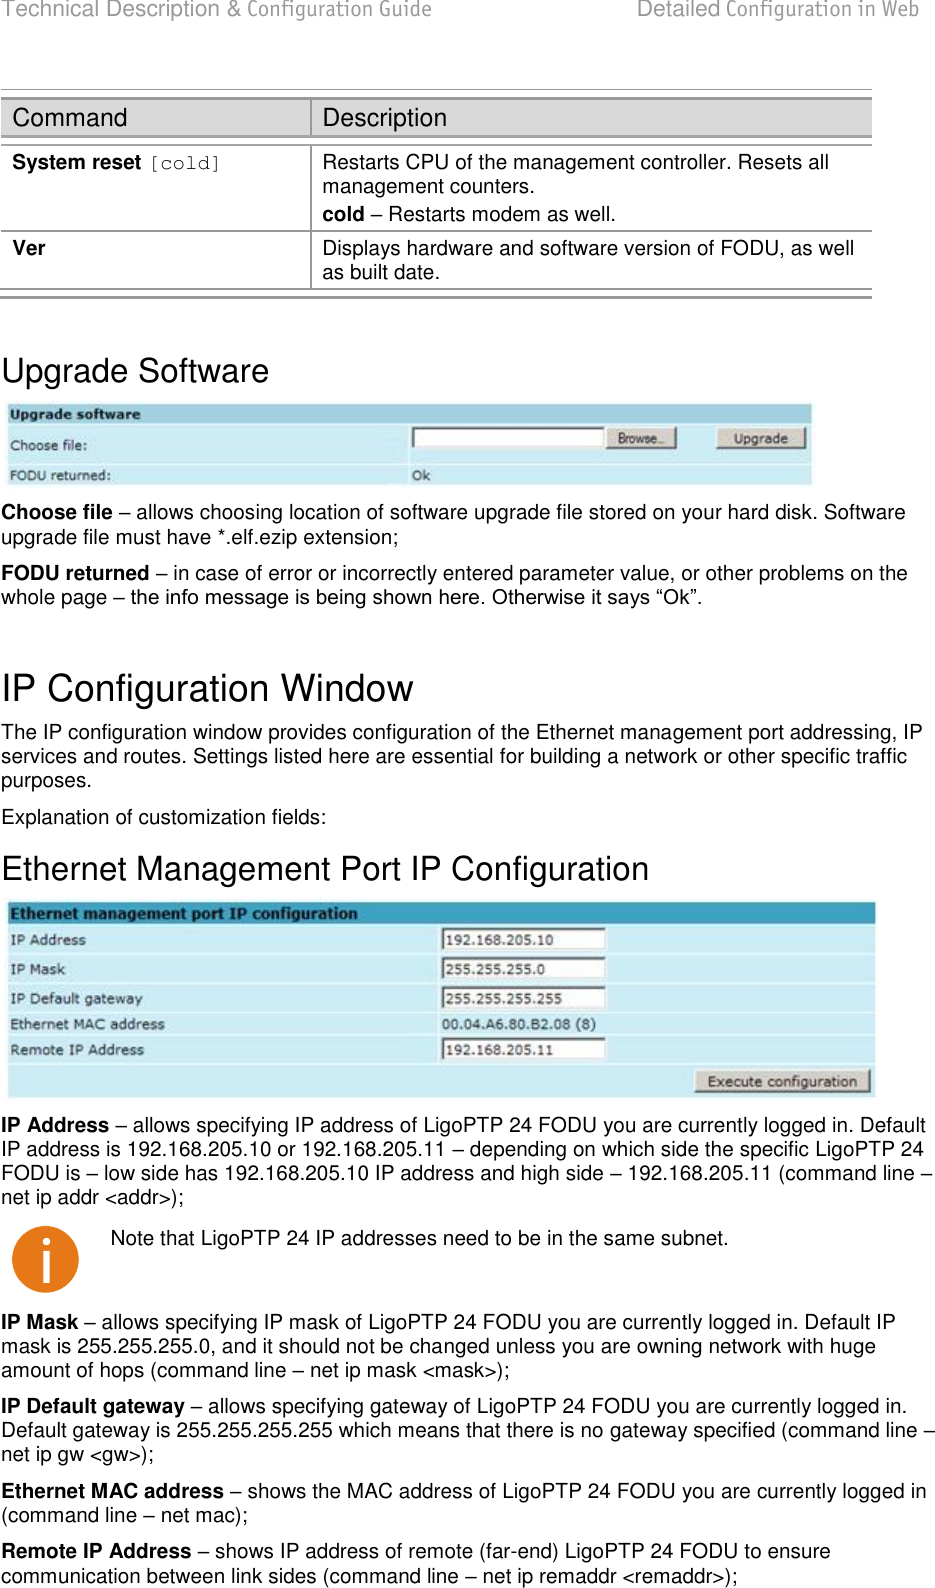 Technical Description &amp; Configuration Guide  Detailed Configuration in Web  LigoWave  Page 44 Command Description System reset [cold] Restarts CPU of the management controller. Resets all management counters. cold  Restarts modem as well. Ver Displays hardware and software version of FODU, as well as built date.  Upgrade Software  Choose file  allows choosing location of software upgrade file stored on your hard disk. Software upgrade file must have *.elf.ezip extension; FODU returned  in case of error or incorrectly entered parameter value, or other problems on the whole page    IP Configuration Window The IP configuration window provides configuration of the Ethernet management port addressing, IP services and routes. Settings listed here are essential for building a network or other specific traffic purposes. Explanation of customization fields: Ethernet Management Port IP Configuration  IP Address  allows specifying IP address of LigoPTP 24 FODU you are currently logged in. Default IP address is 192.168.205.10 or 192.168.205.11  depending on which side the specific LigoPTP 24 FODU is  low side has 192.168.205.10 IP address and high side  192.168.205.11 (command line  net ip addr &lt;addr&gt;);  Note that LigoPTP 24 IP addresses need to be in the same subnet. IP Mask  allows specifying IP mask of LigoPTP 24 FODU you are currently logged in. Default IP mask is 255.255.255.0, and it should not be changed unless you are owning network with huge amount of hops (command line  net ip mask &lt;mask&gt;); IP Default gateway  allows specifying gateway of LigoPTP 24 FODU you are currently logged in. Default gateway is 255.255.255.255 which means that there is no gateway specified (command line  net ip gw &lt;gw&gt;); Ethernet MAC address  shows the MAC address of LigoPTP 24 FODU you are currently logged in (command line  net mac); Remote IP Address  shows IP address of remote (far-end) LigoPTP 24 FODU to ensure communication between link sides (command line  net ip remaddr &lt;remaddr&gt;); 